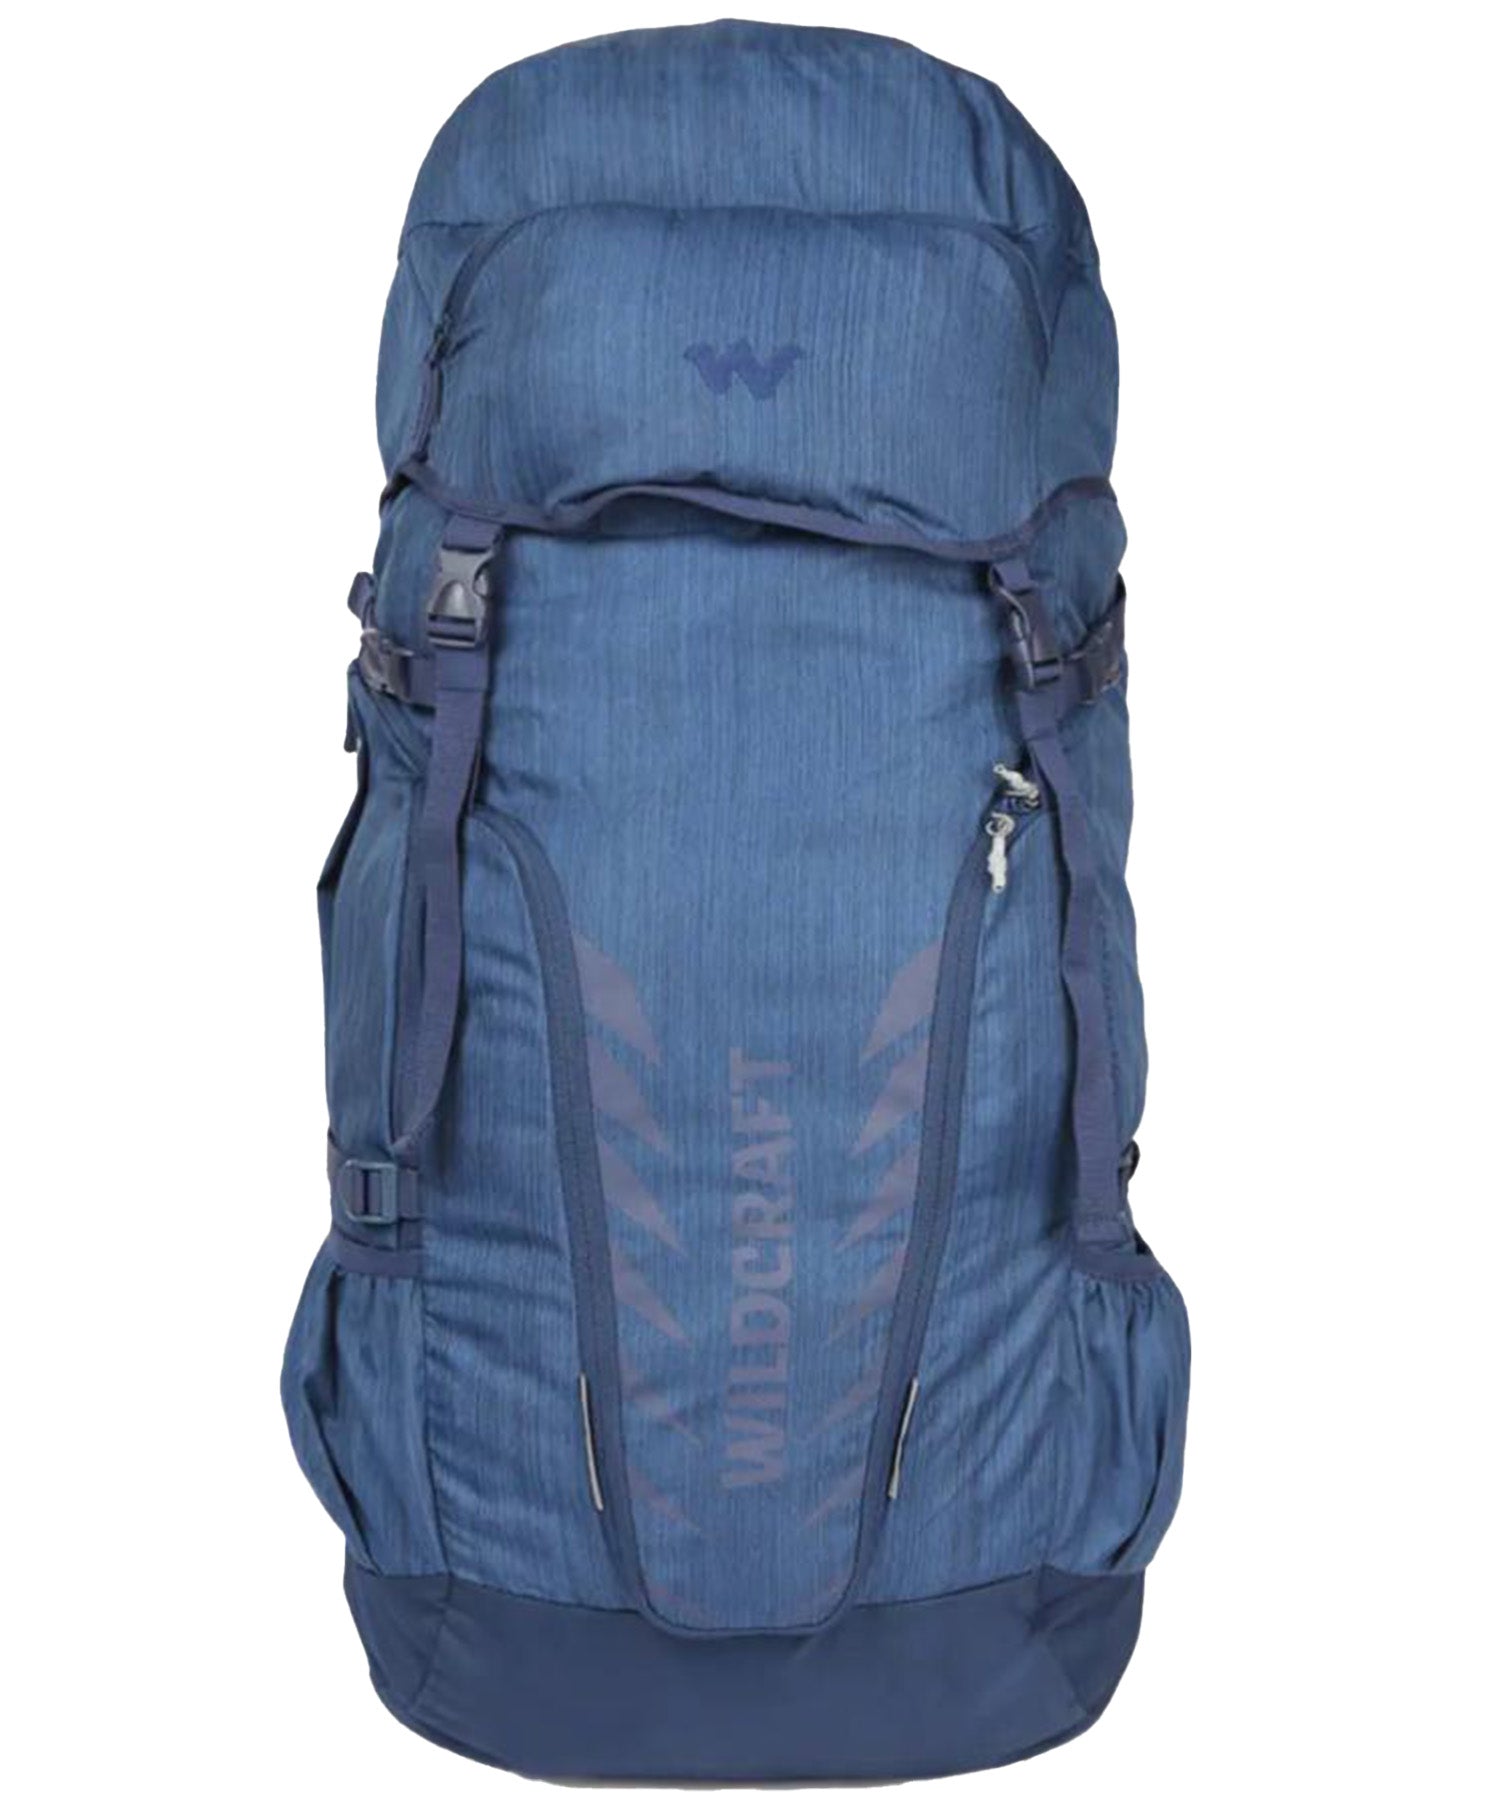 Wildcraft Travel Pro 50ltr Blue Camping Backpack, TRAVELPRO 50BLU